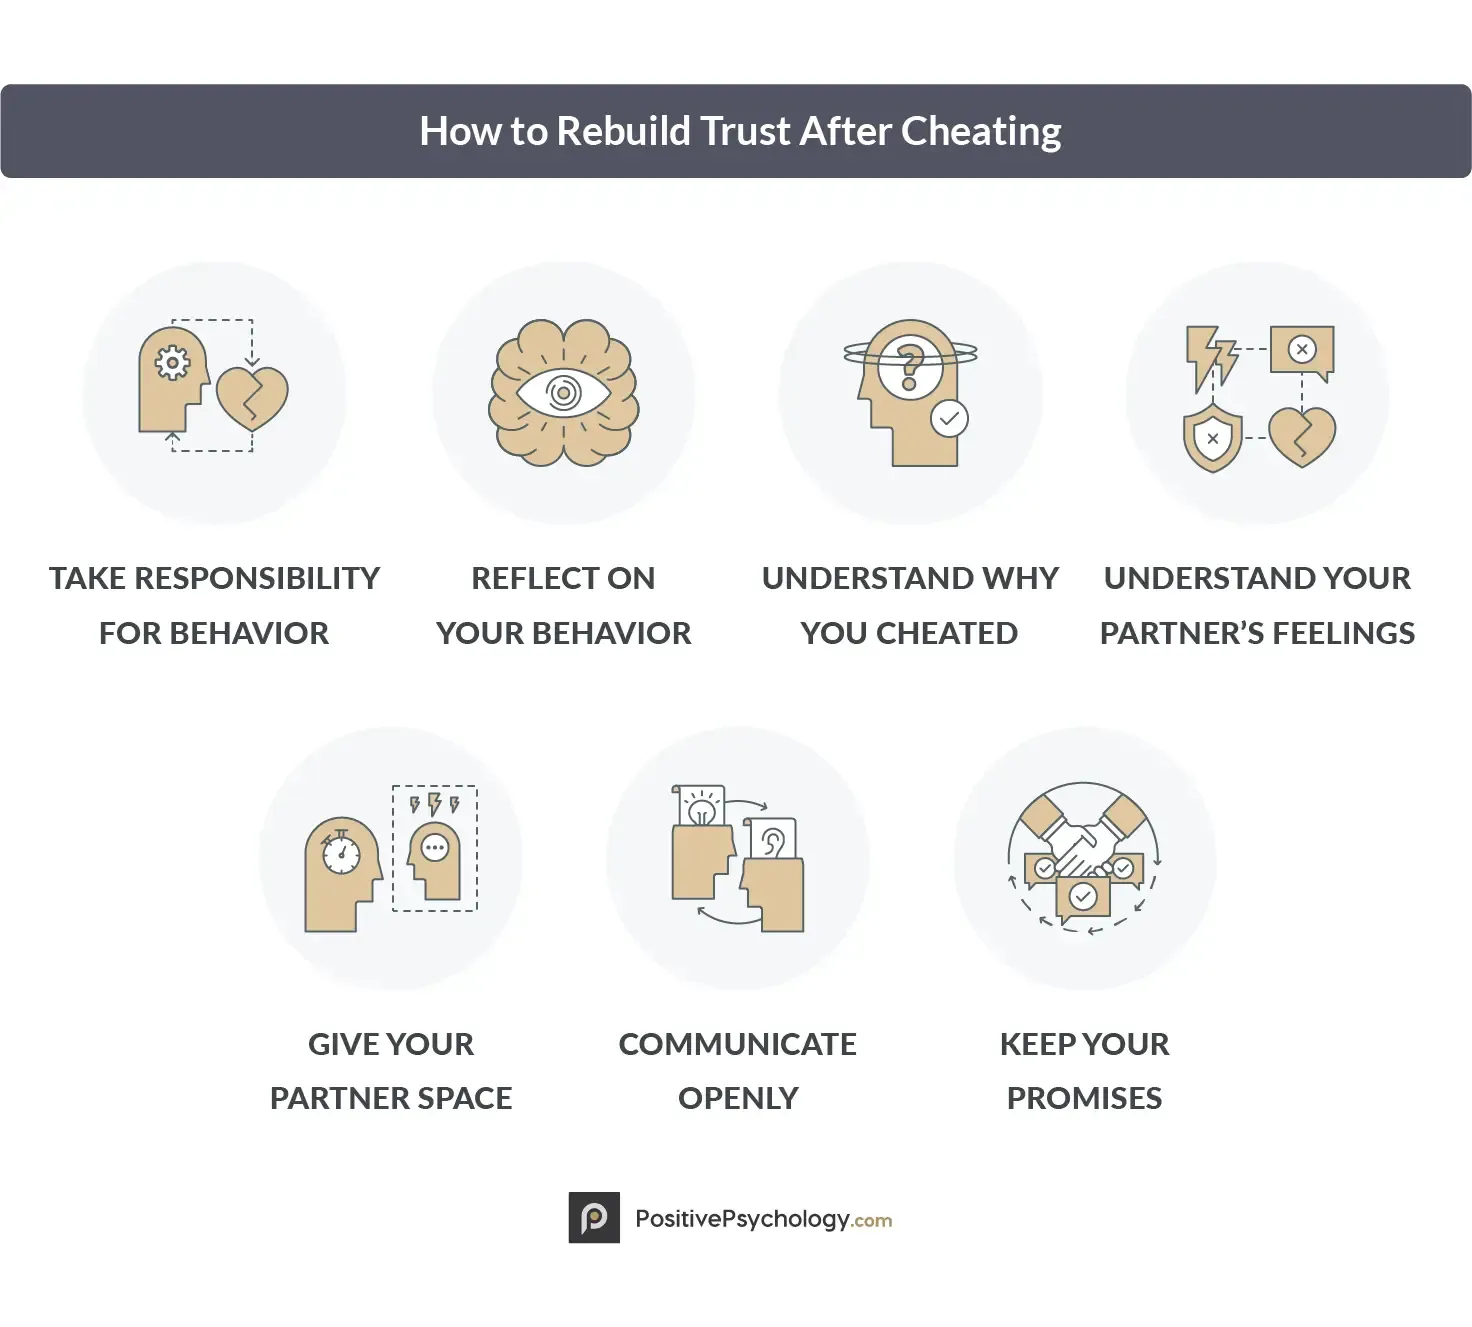 How to Rebuild Trust After Cheating